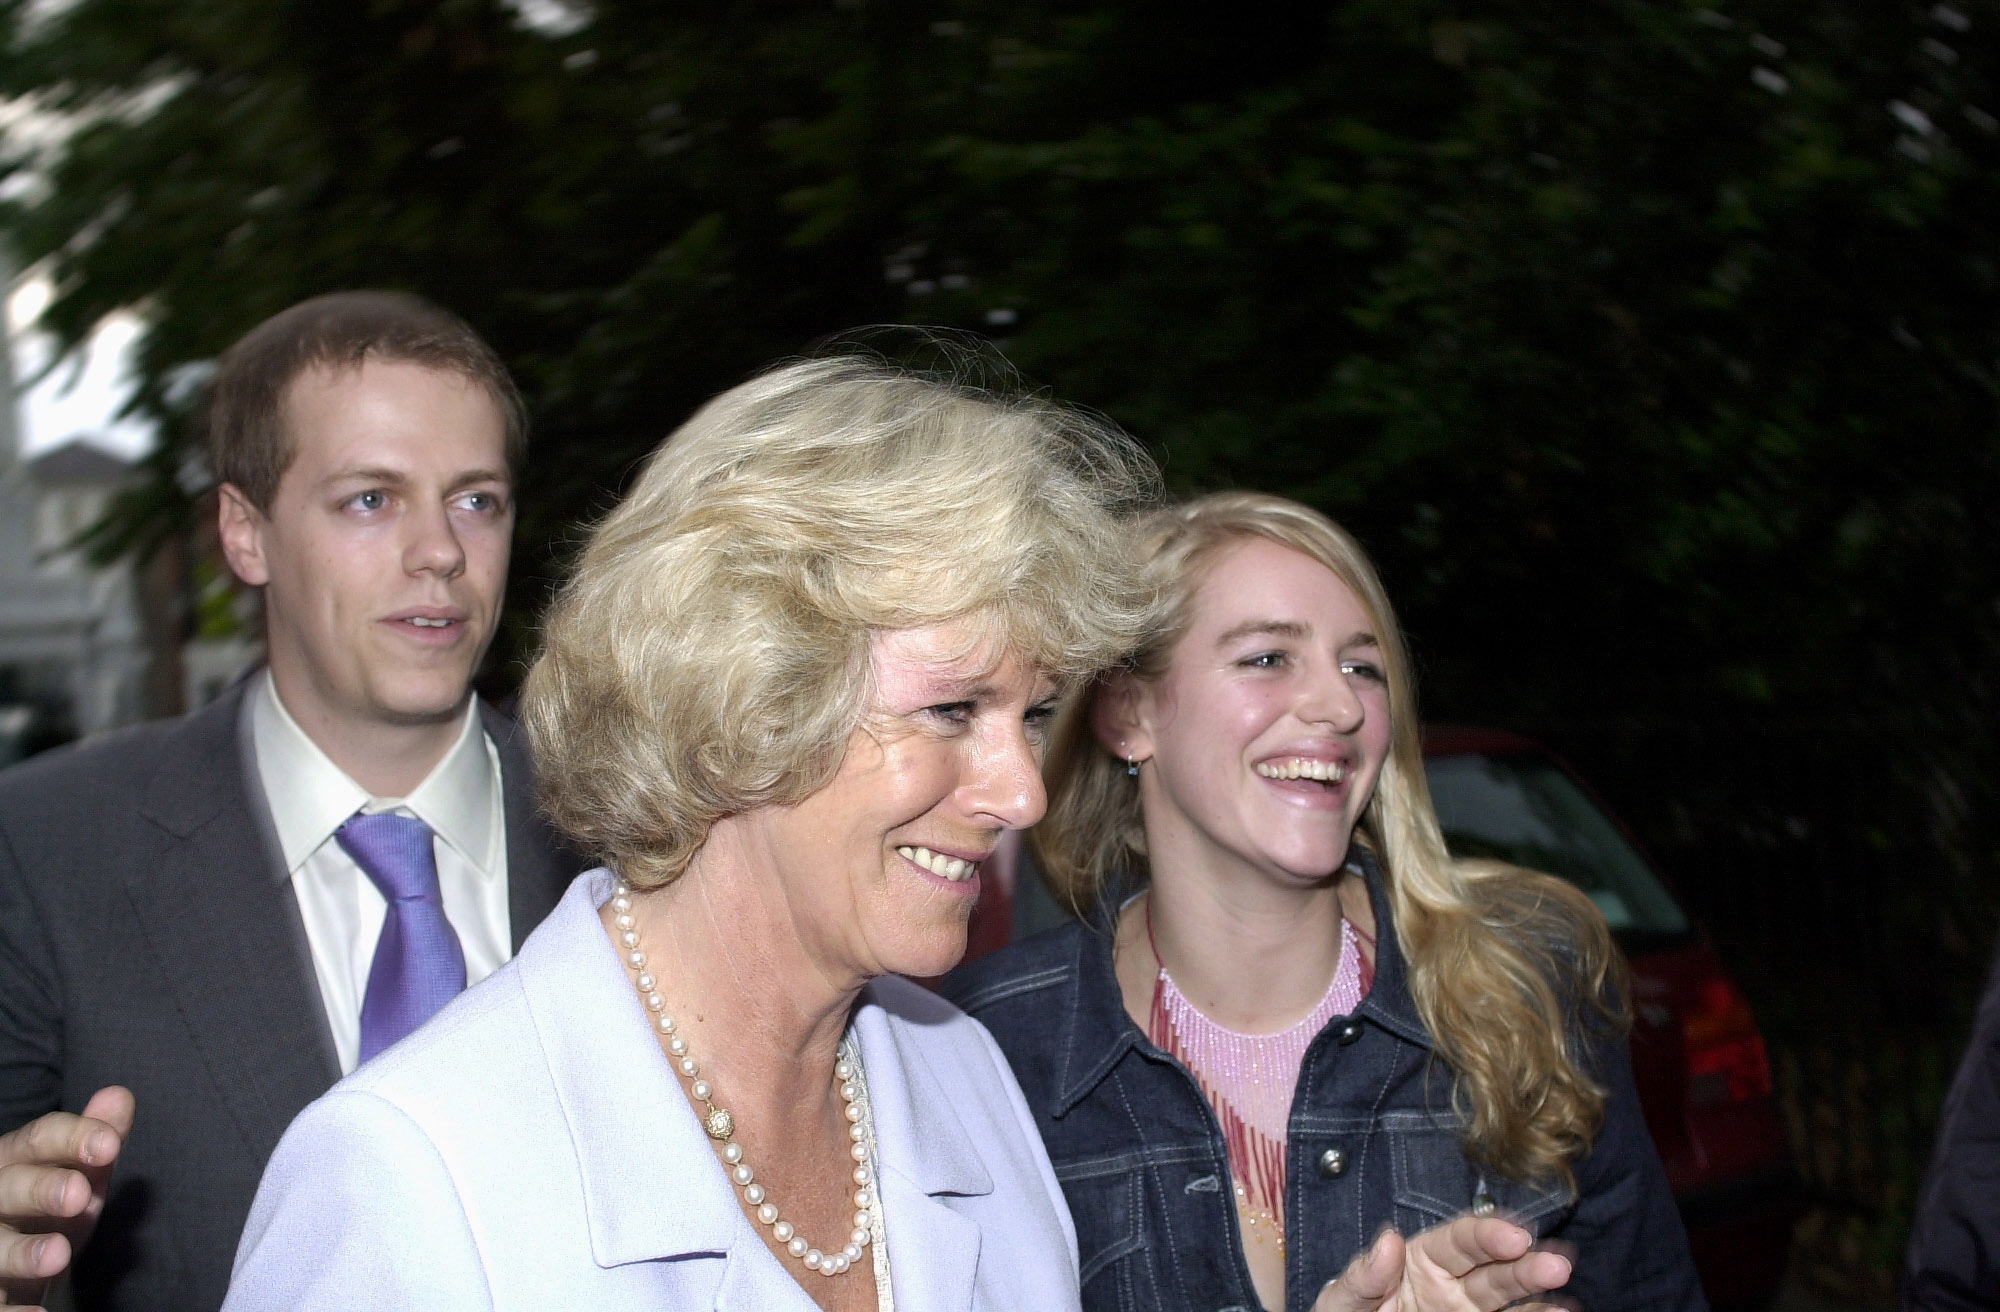 Queen Camilla and her children, Tom Parker Bowles and Laura Lopes, in London on July 5, 2000. | Source: Getty Images